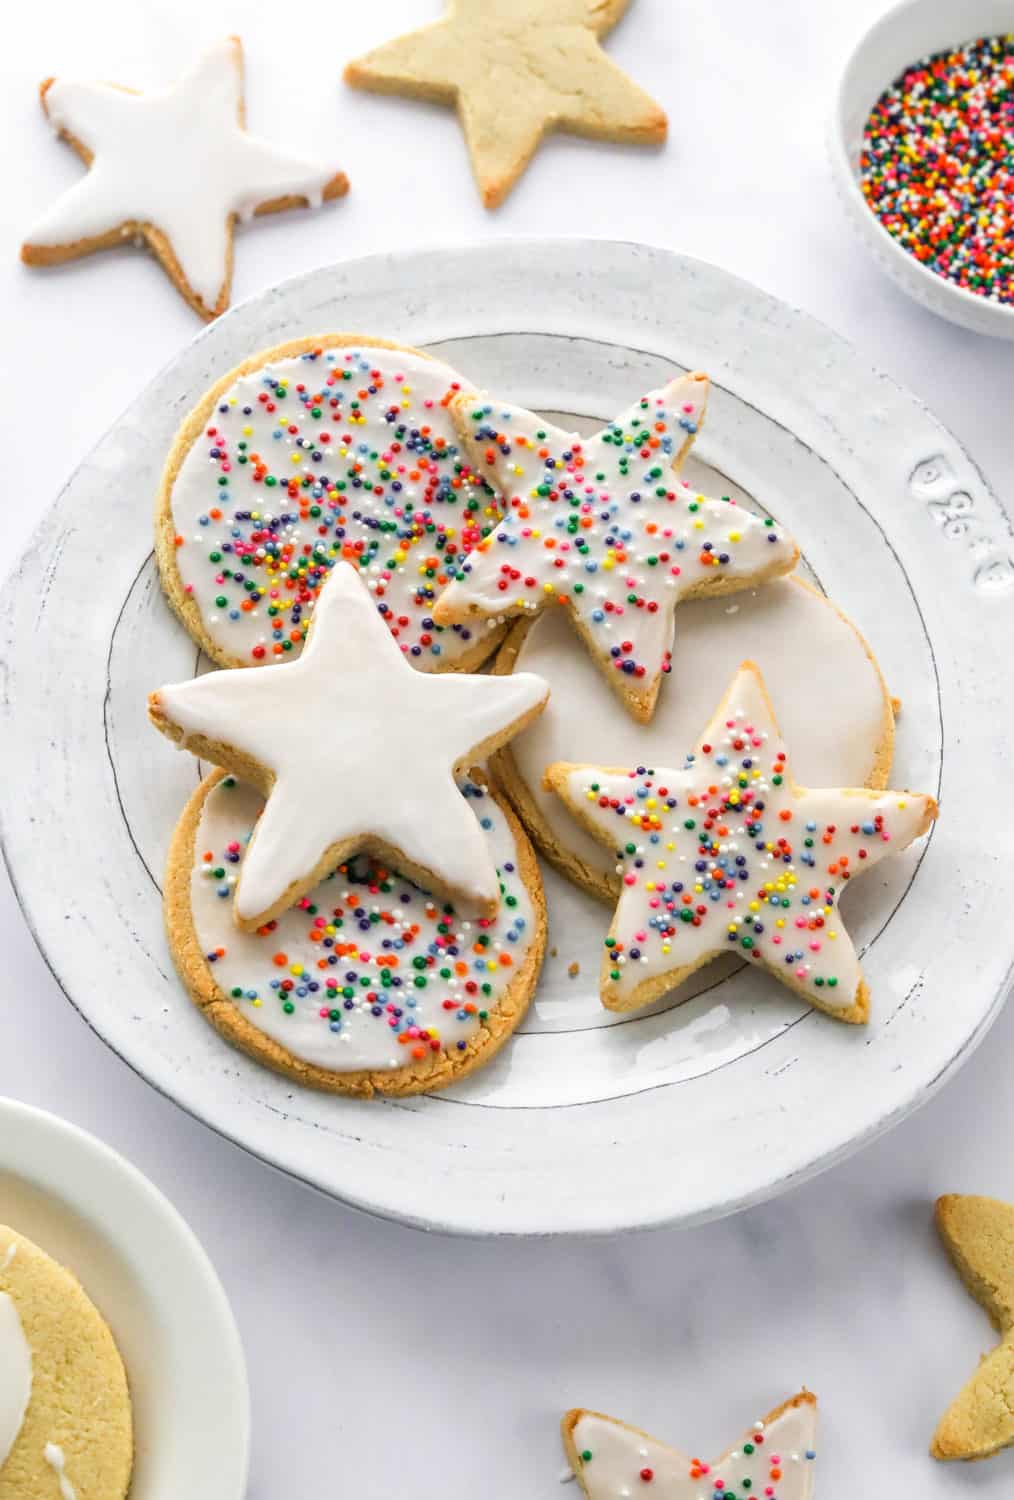 Round, rimmed plate with star and circle white iced cookies on it with rainbow sprinkle on the cookies and more star shaped cookies behind them. 